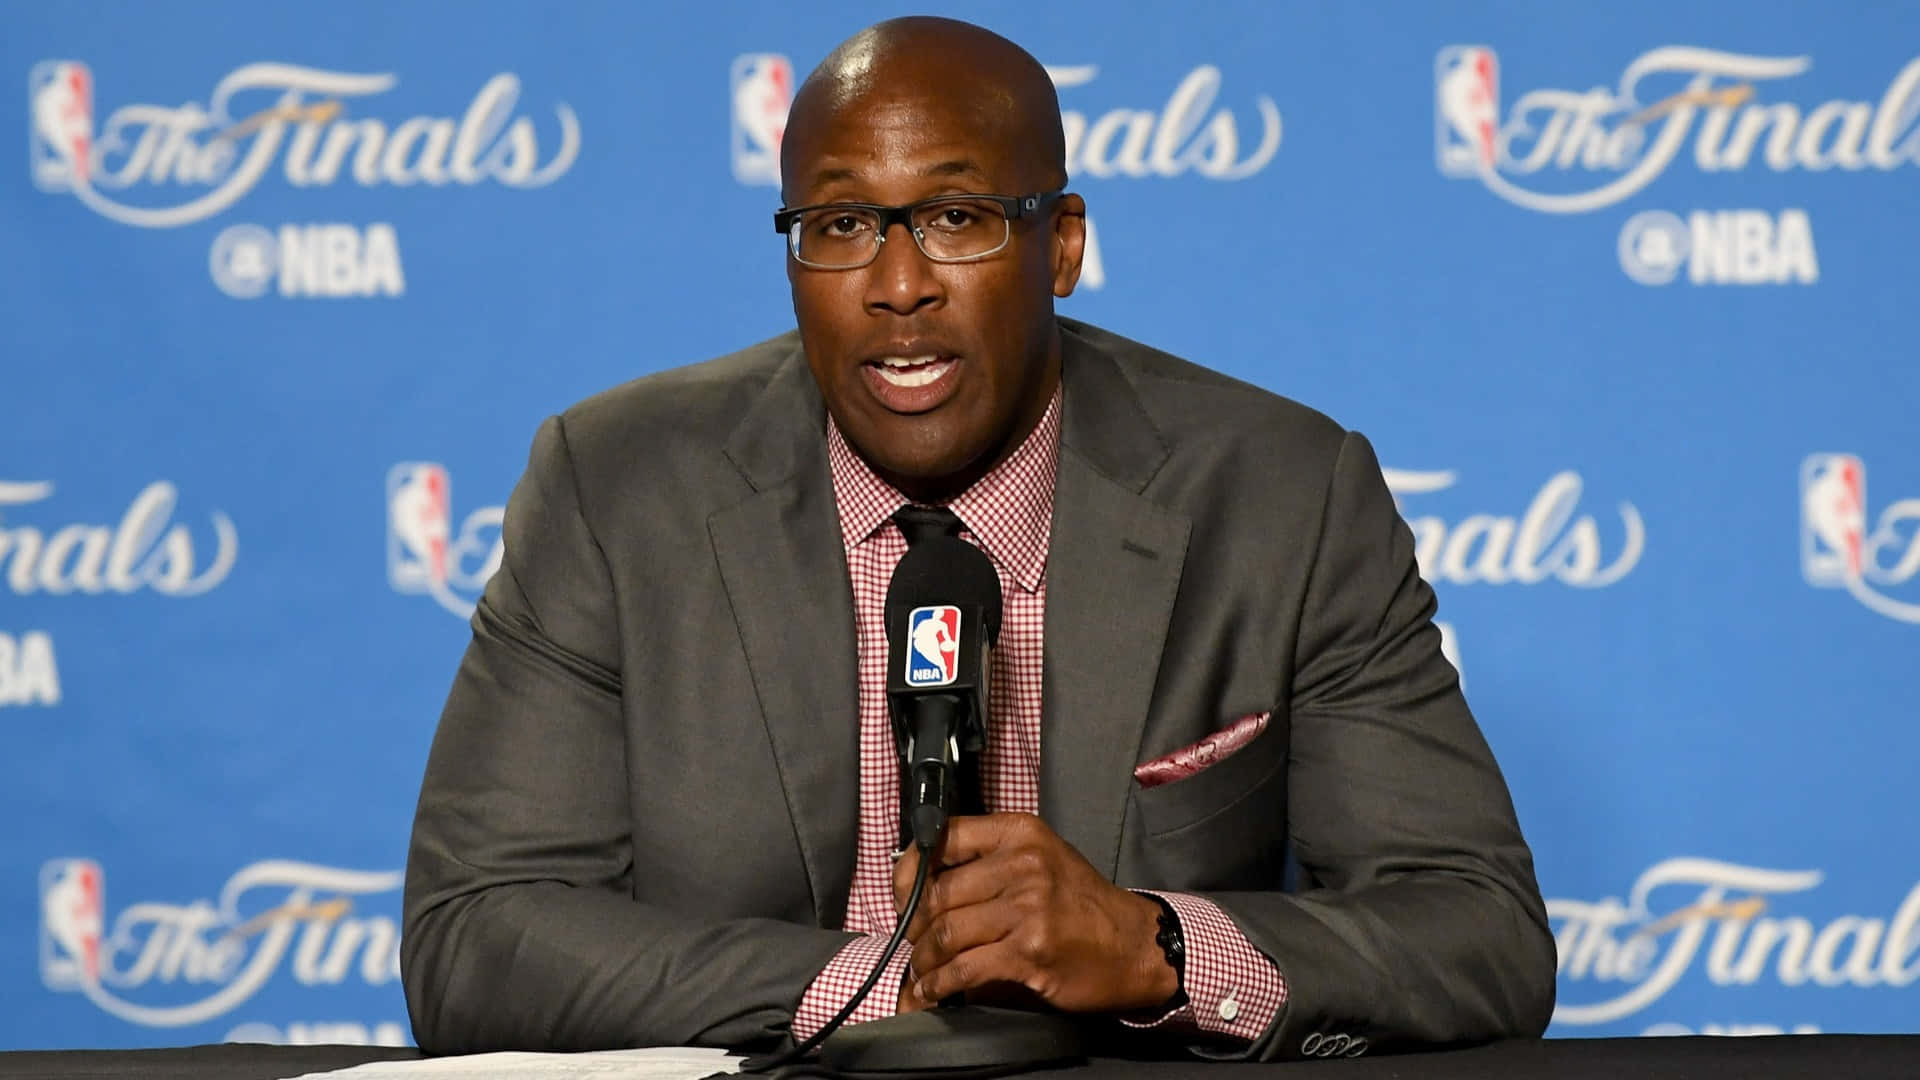 American Basketball Coach Mike Brown 2017 Nba Finals Media Conference Wallpaper